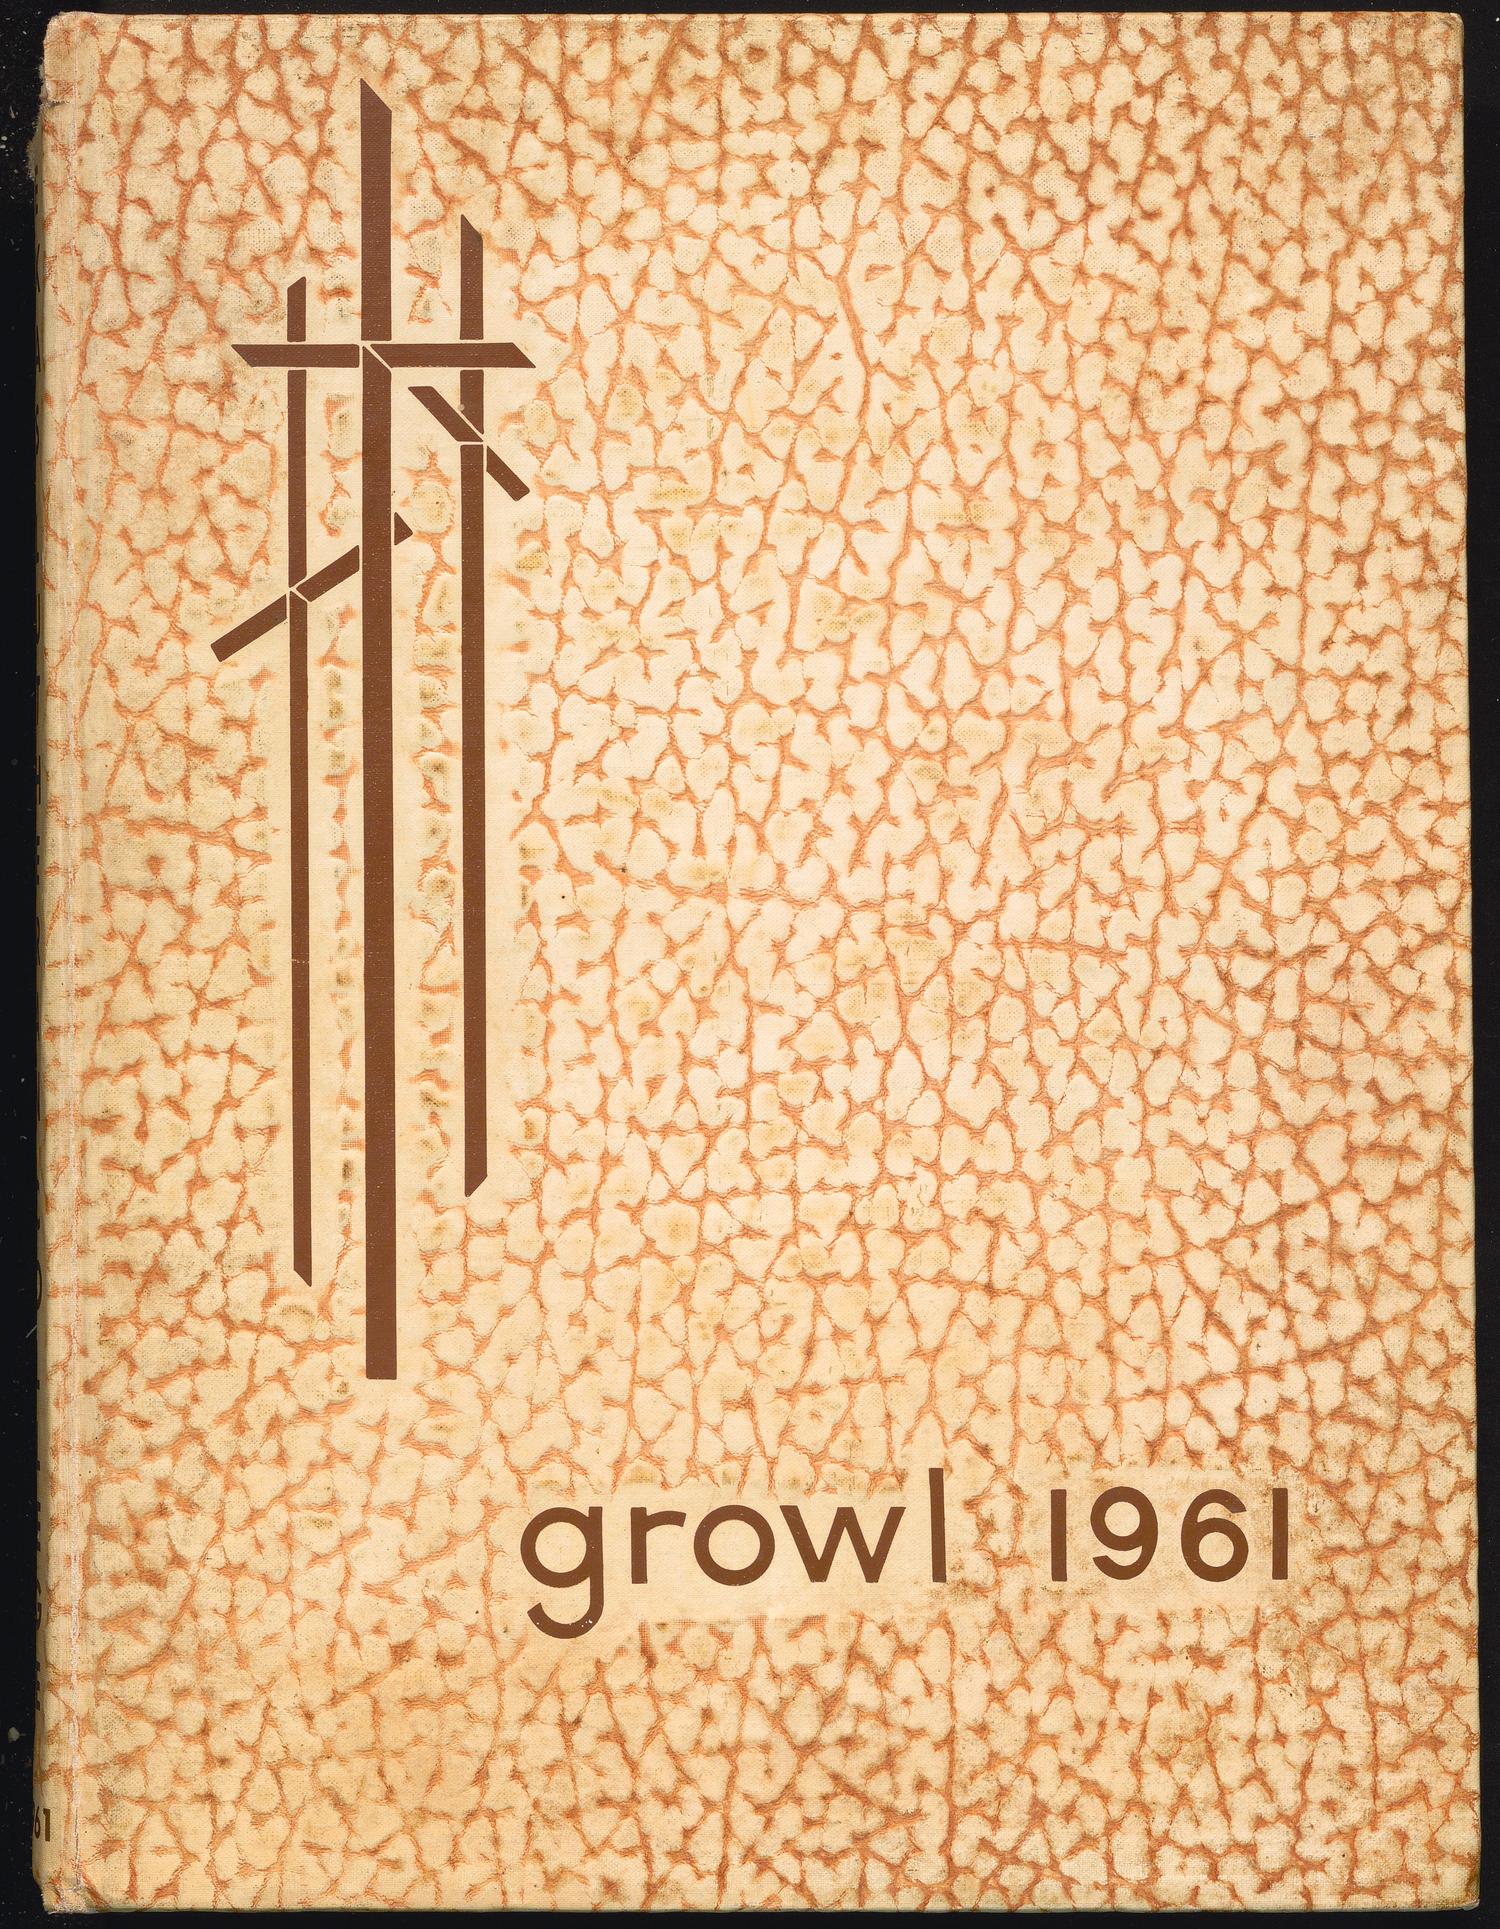 The Growl, Yearbook of Texas Lutheran College: 1961
                                                
                                                    Front Cover
                                                